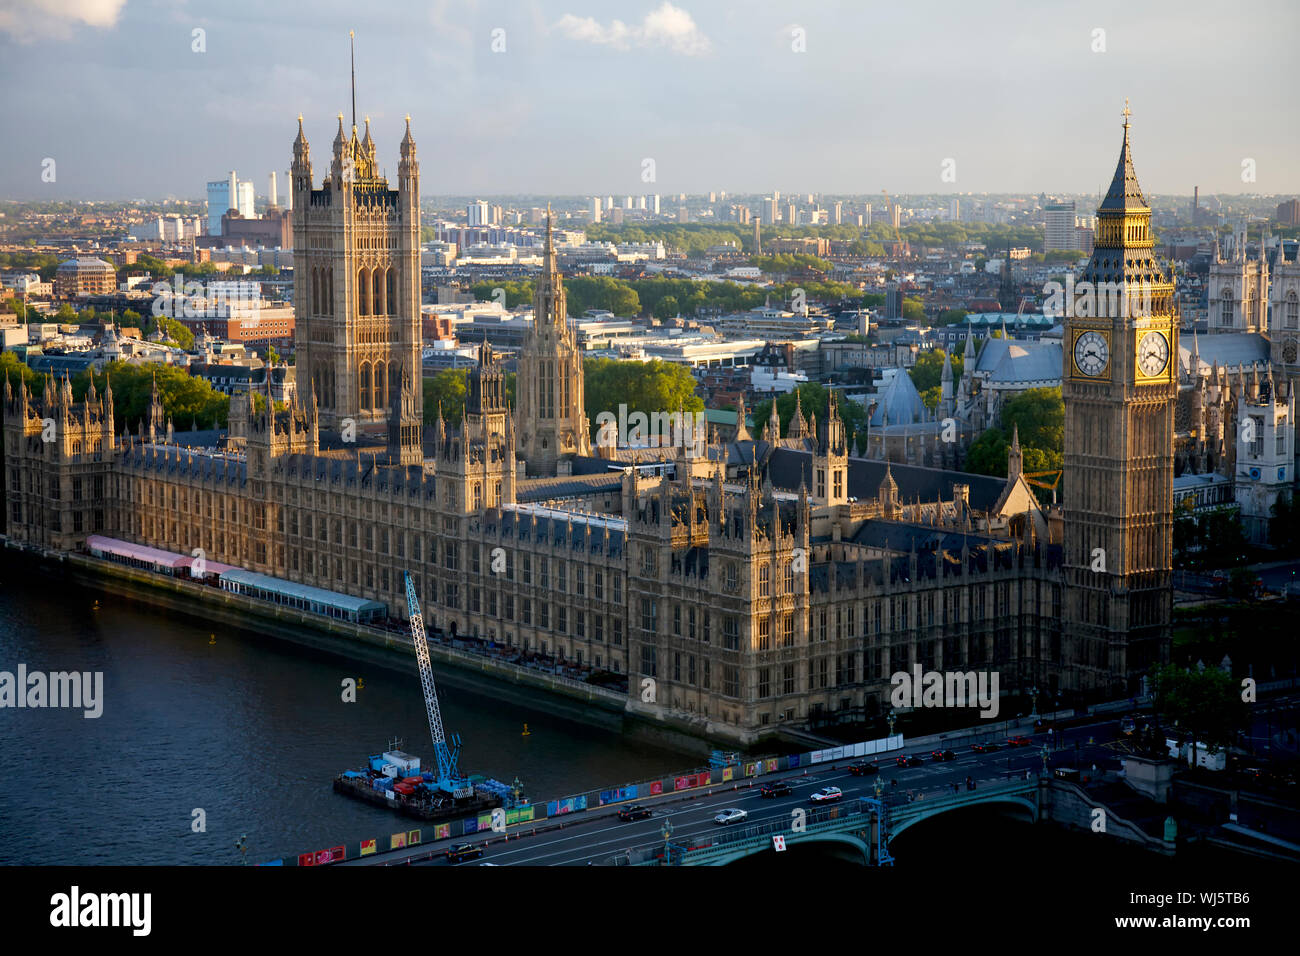 Westminster Palace And Bridge By Thames River In City Stock Photo